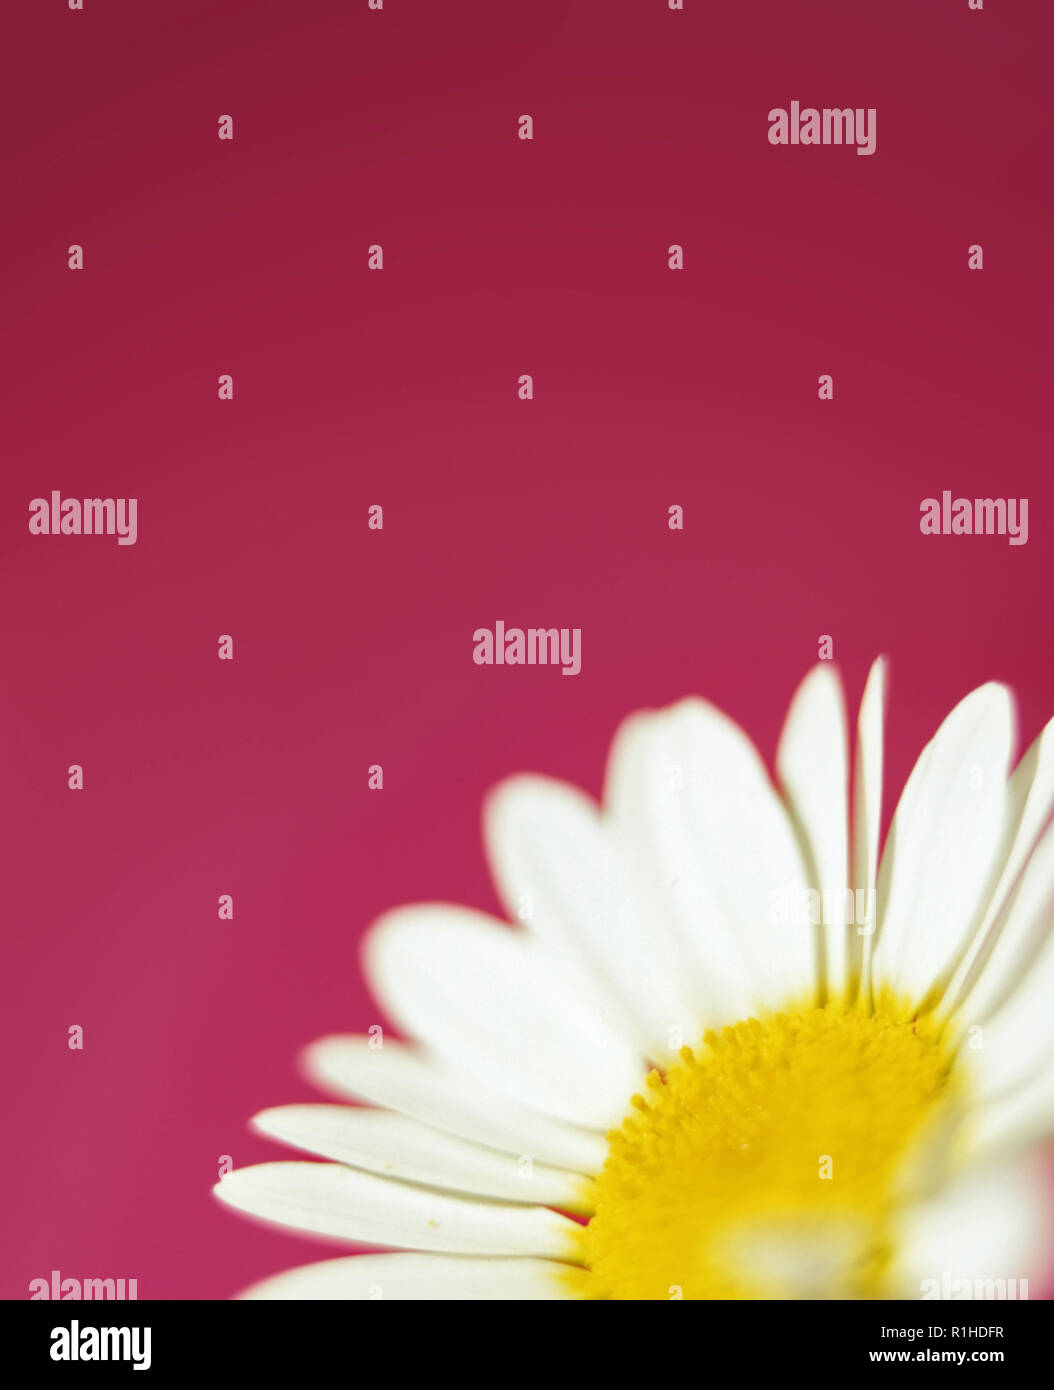 A close up of a daisy against a pink background. Stock Photo